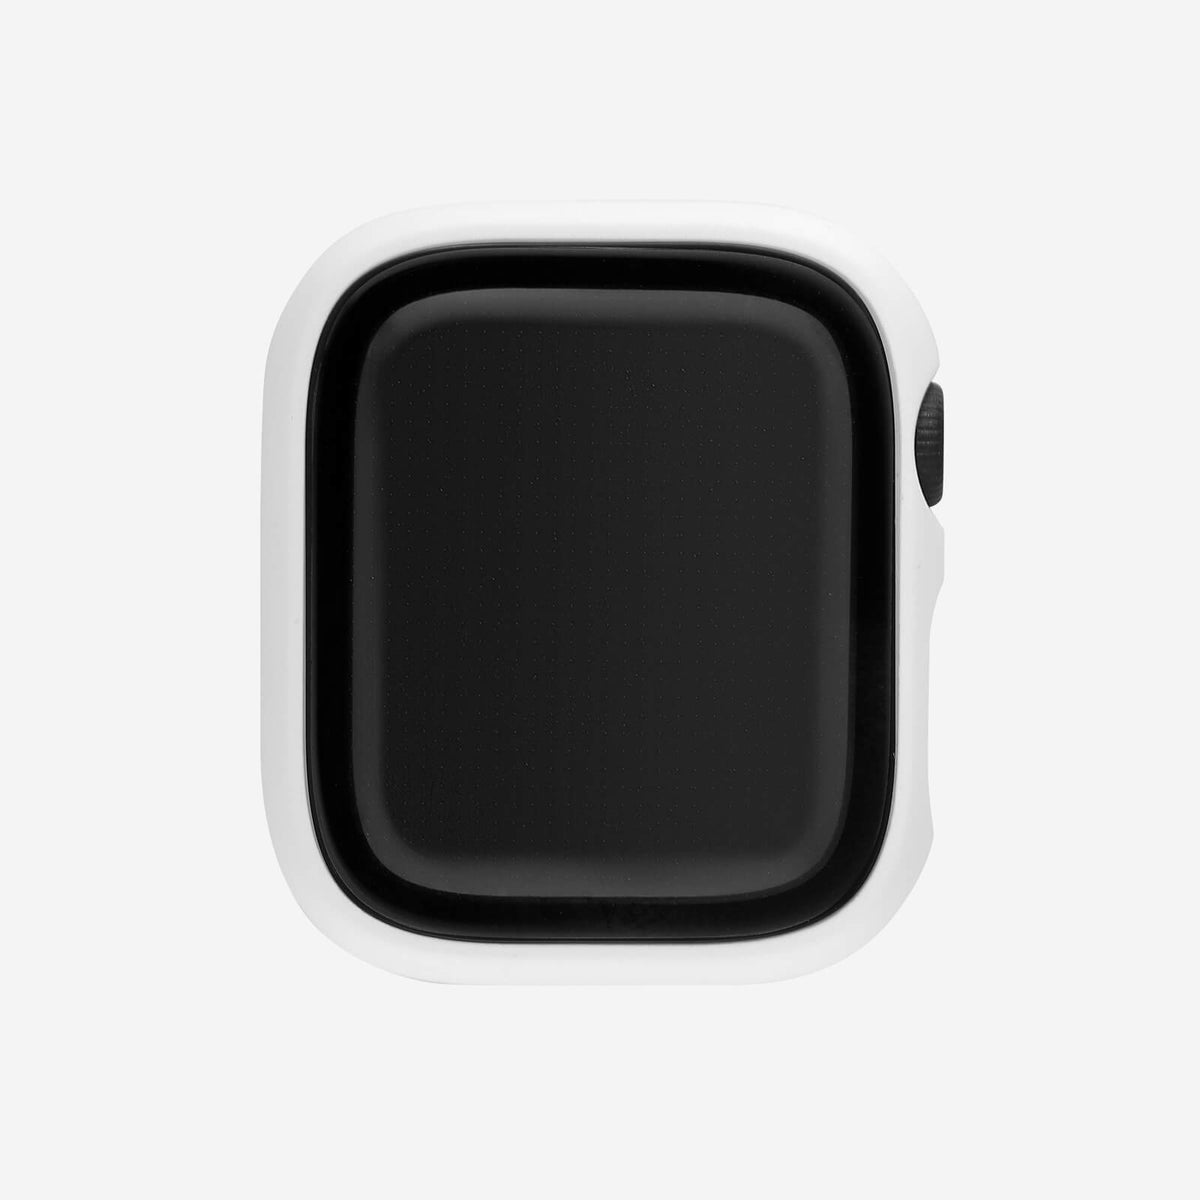 Apple Watch Slim Screen Protector Case - White